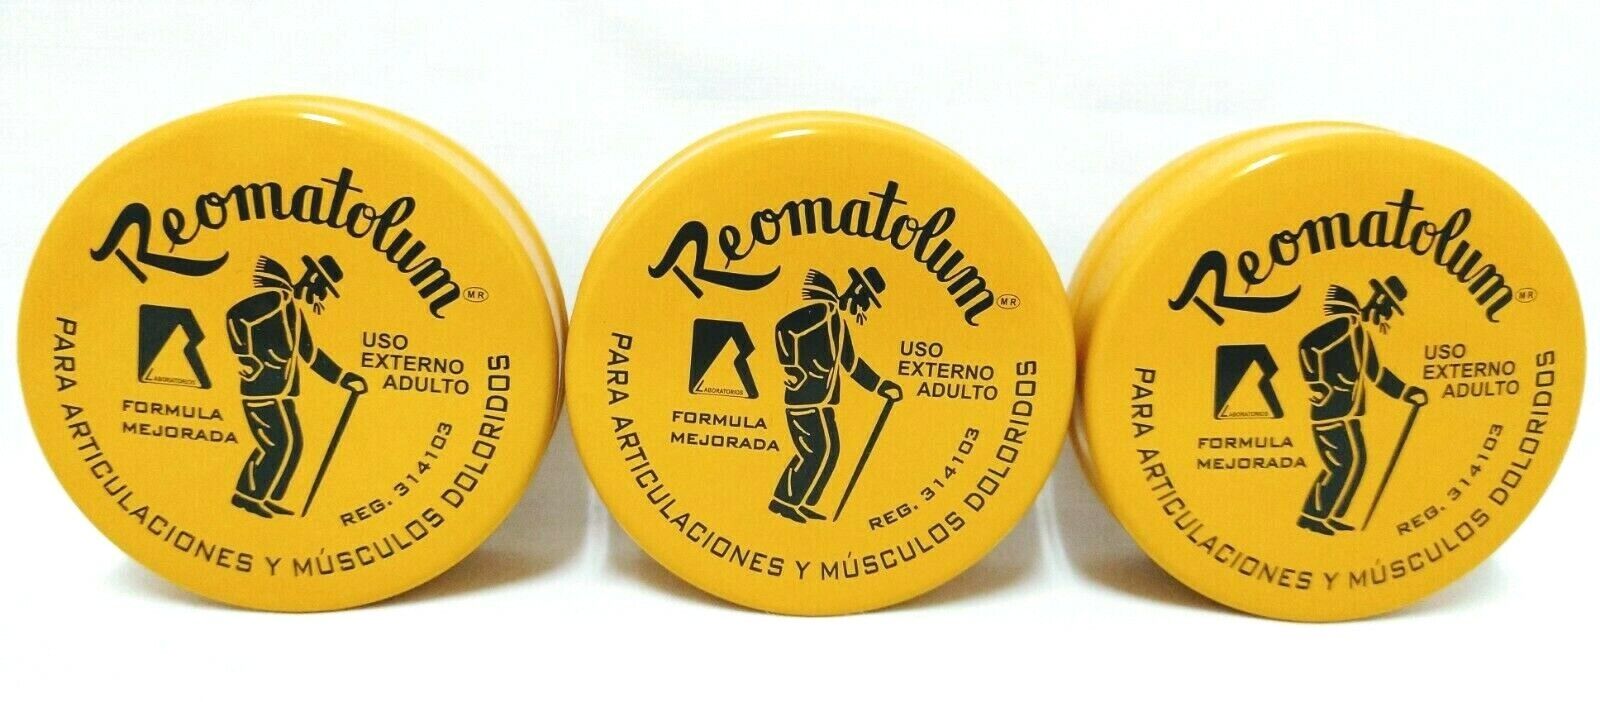 3 REOMATOLUM Pomada Articulaciones, Musculos Doloridos / Ointment Joins Muscles Unbranded 7 503002 045008 - фотография #5